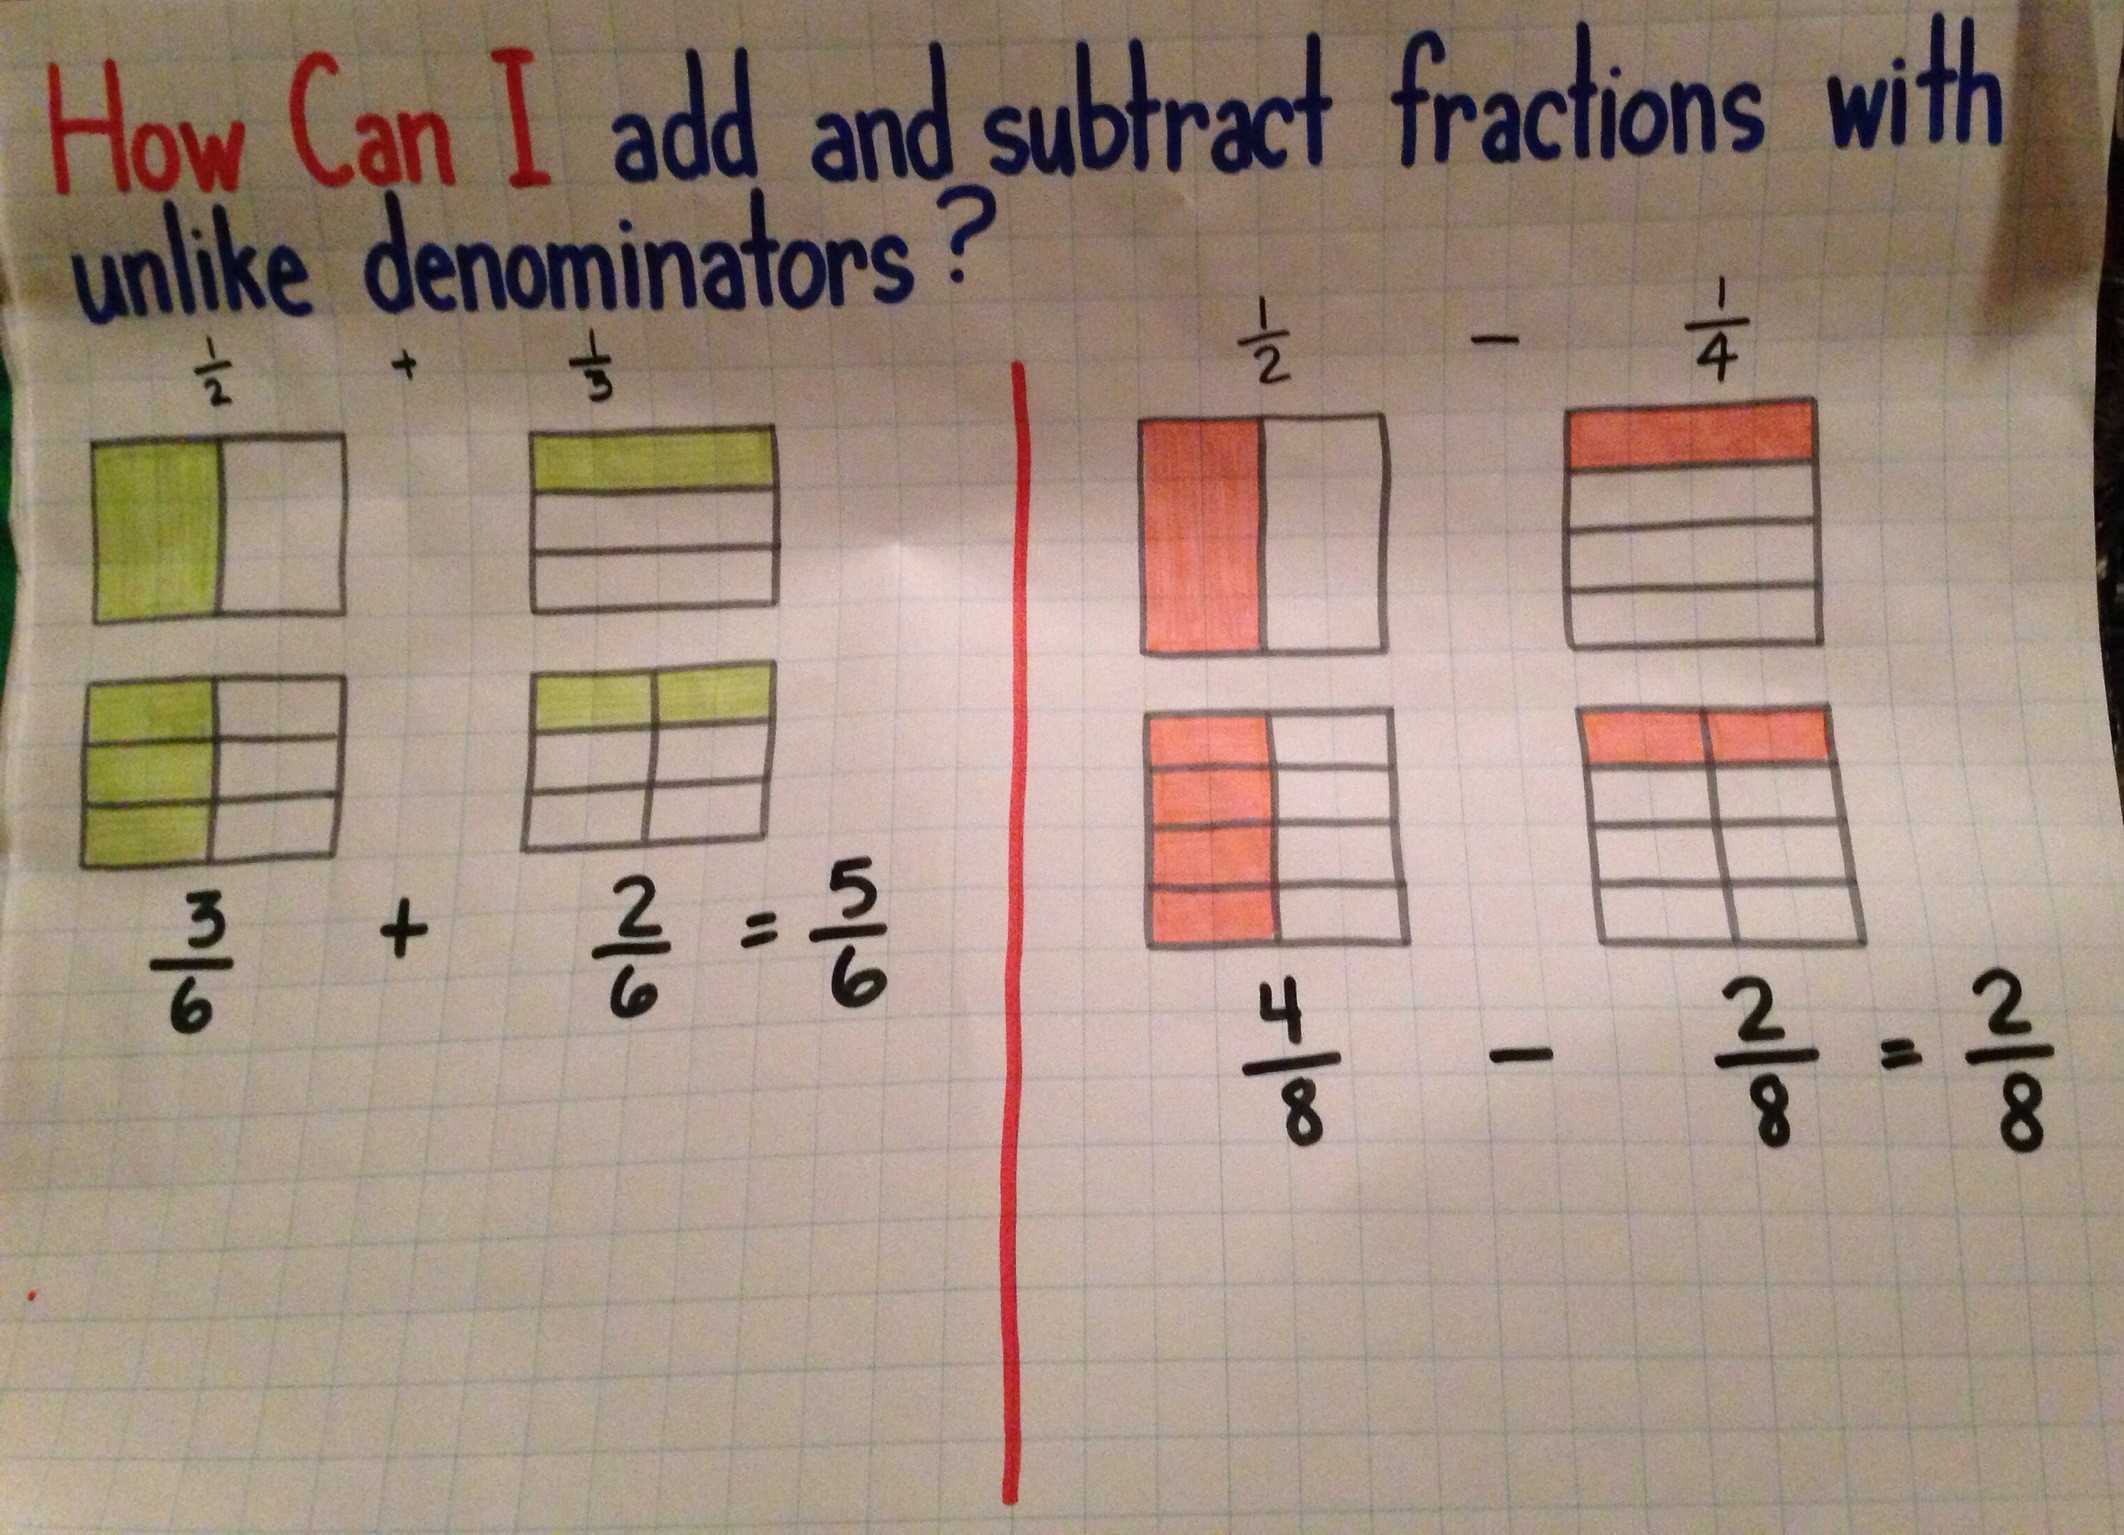 Subtracting Fractions with Unlike Denominators Worksheet together with Adding Unlike Fractions Worksheet Fresh Add and Subtract Fractions